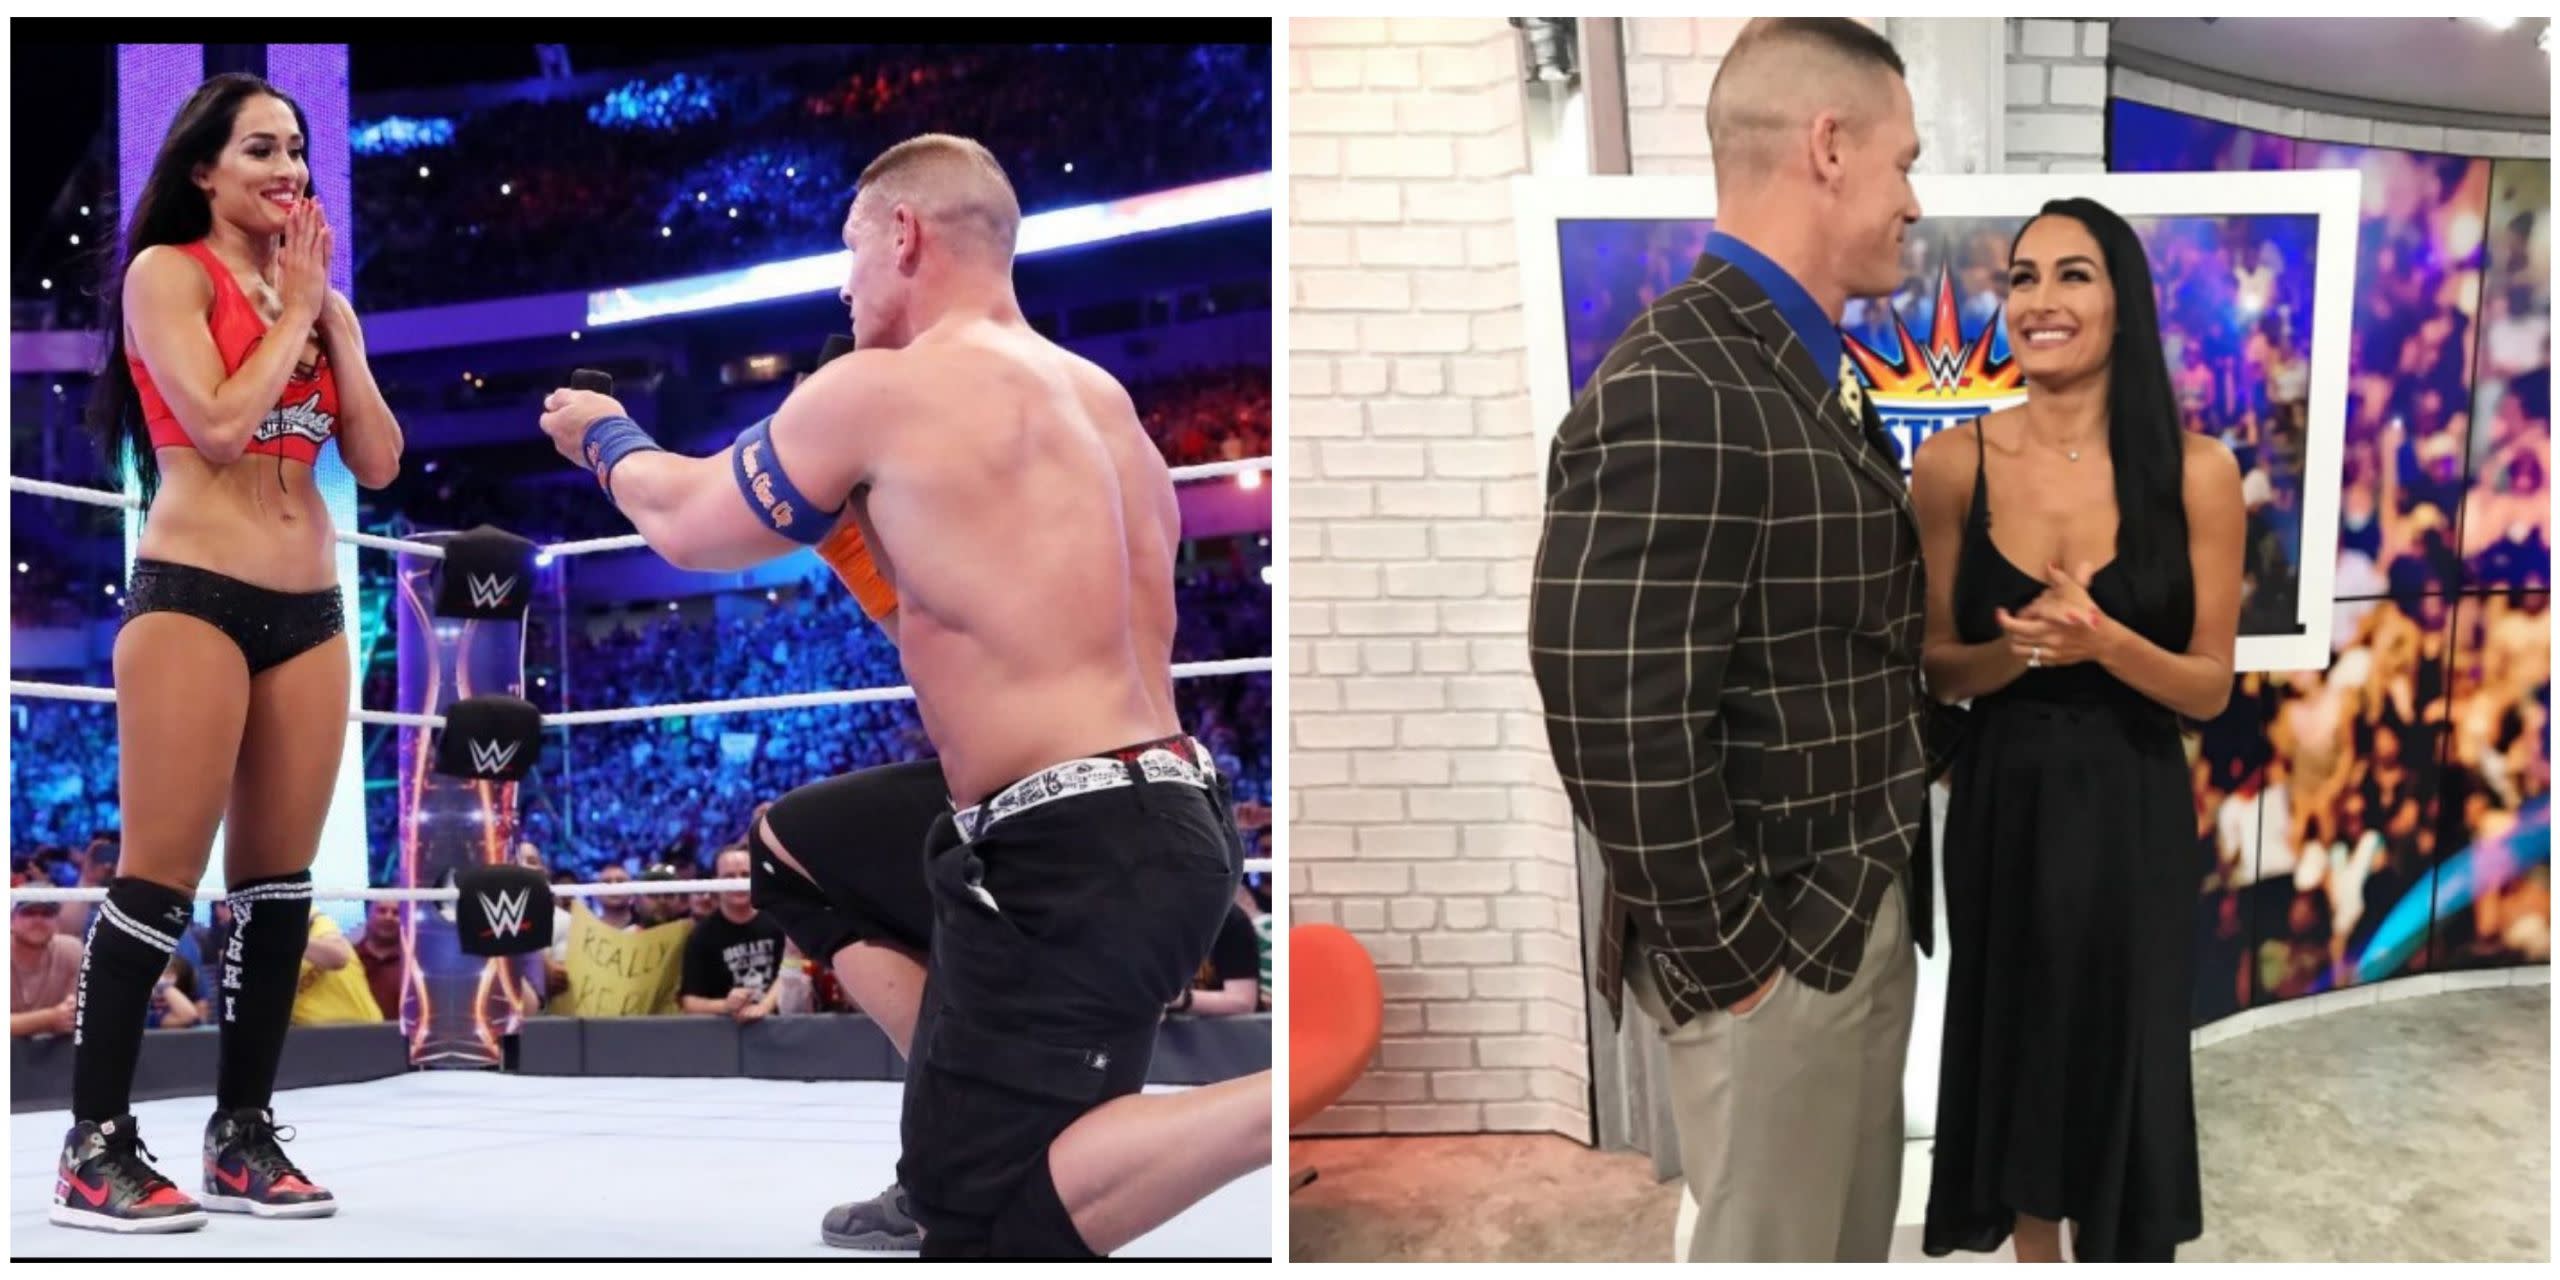 WATCH: John Cena Gets Engaged to Longtime Girlfriend After Emotional Proposal2560 x 1280